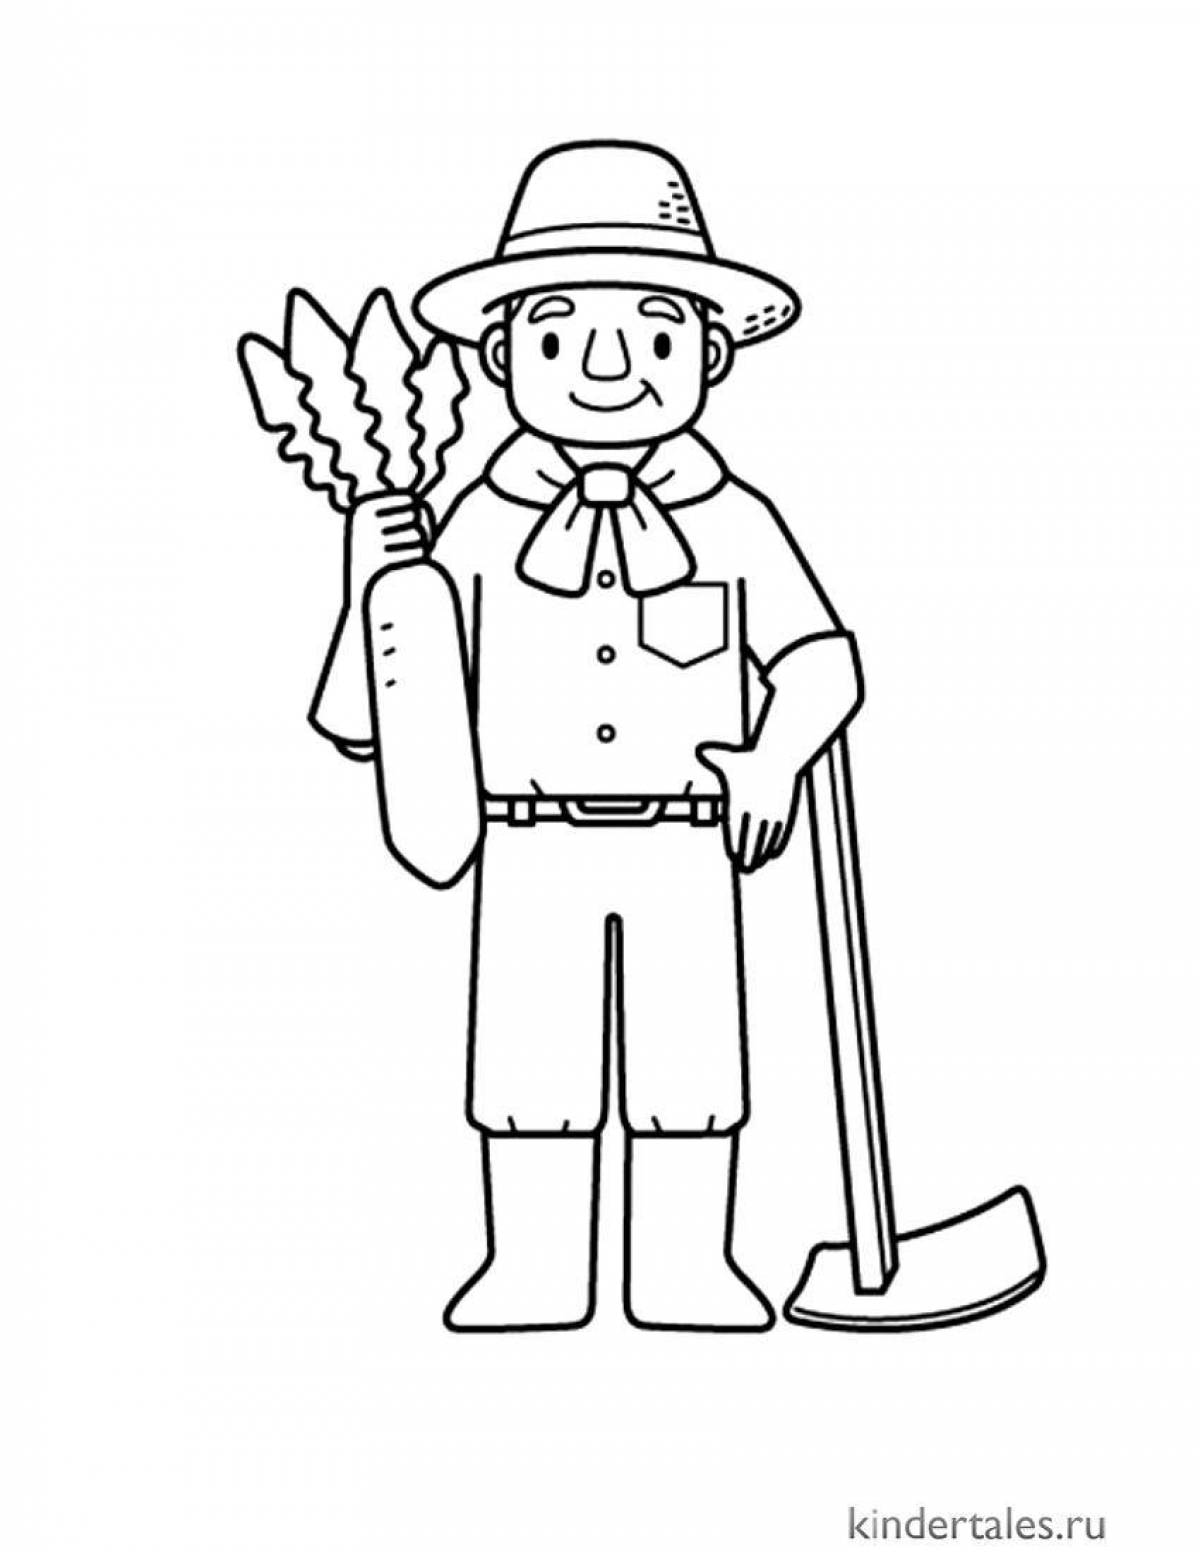 Coloring page playful farmer